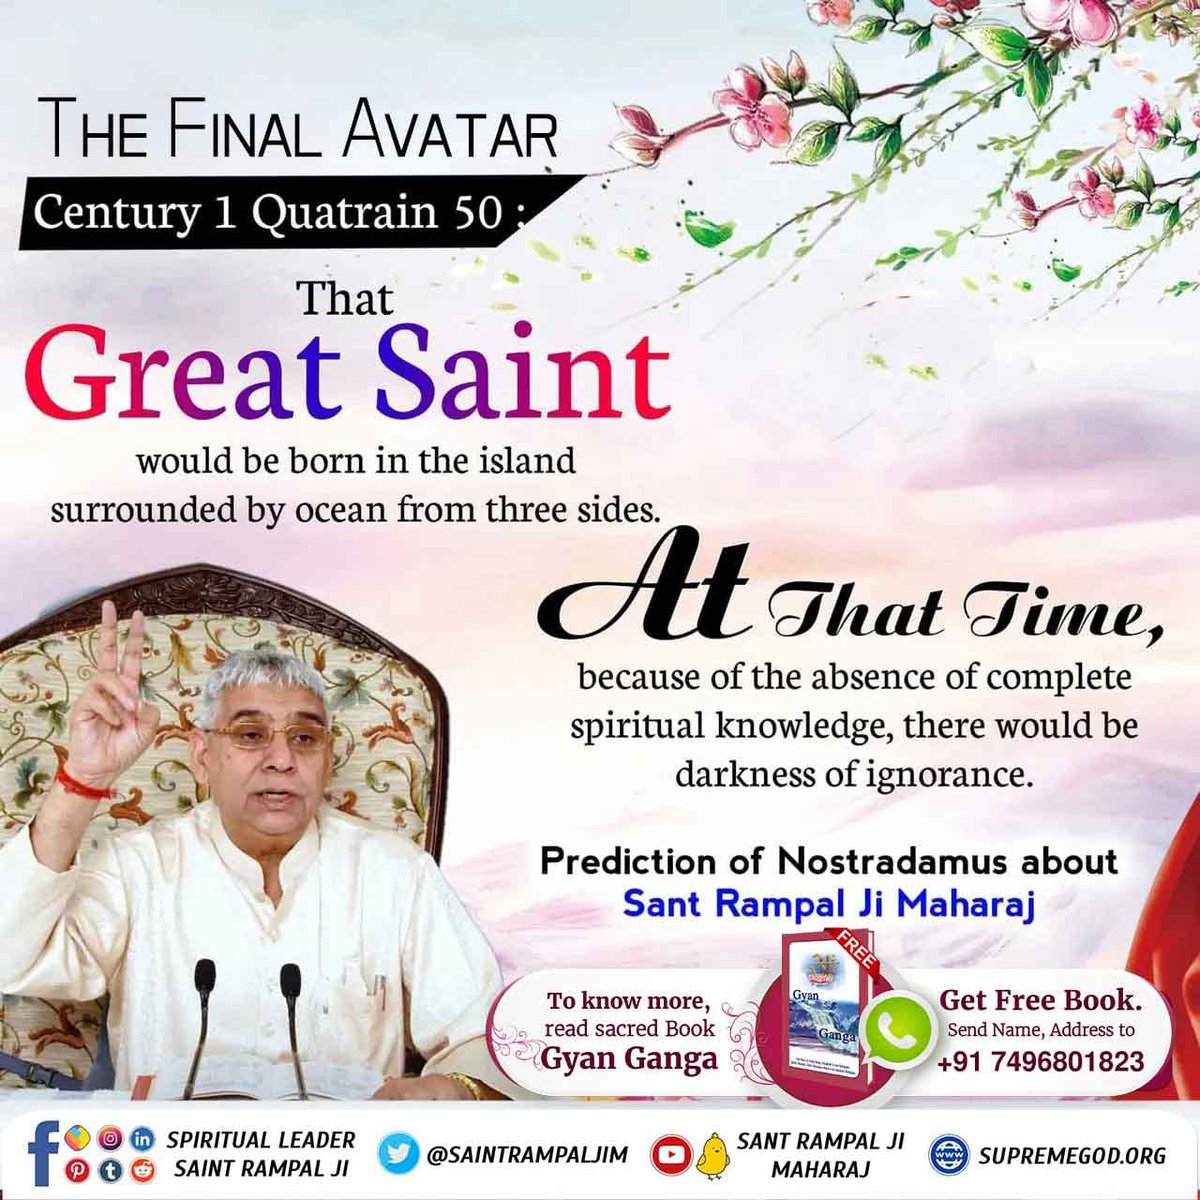 #Mysterious_Prophecies Dutch visionary Gerard Kreisie foresaw a great personality from India binding the entire world in the thread of humanity. Sant Rampal Ji Maharaj is fulfilling this prophecy, becoming a global symbol of unity and compassion. #Great_Prophecies_2024